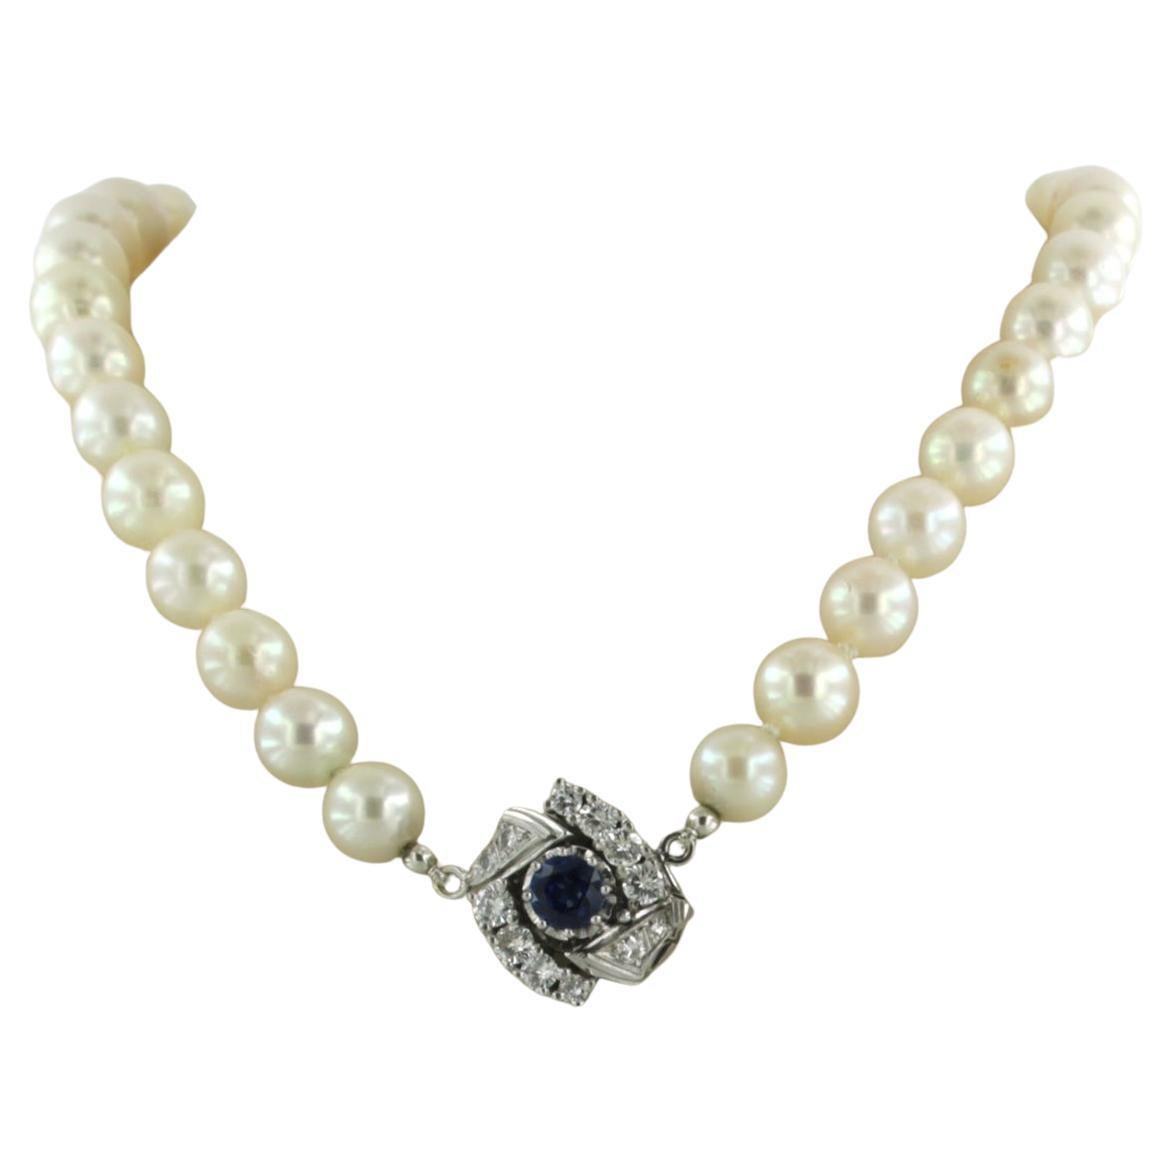 Pearl necklace with a 14k clasp set with sapphire and single/brilliant cut diamond 0.60 ct - F/G - VS/SI - L 42 cm

detailed description

The length of the necklace is 42 cm long

the size of the lock is 1.6 cm x 1.5 cm wide

Weight 38.7